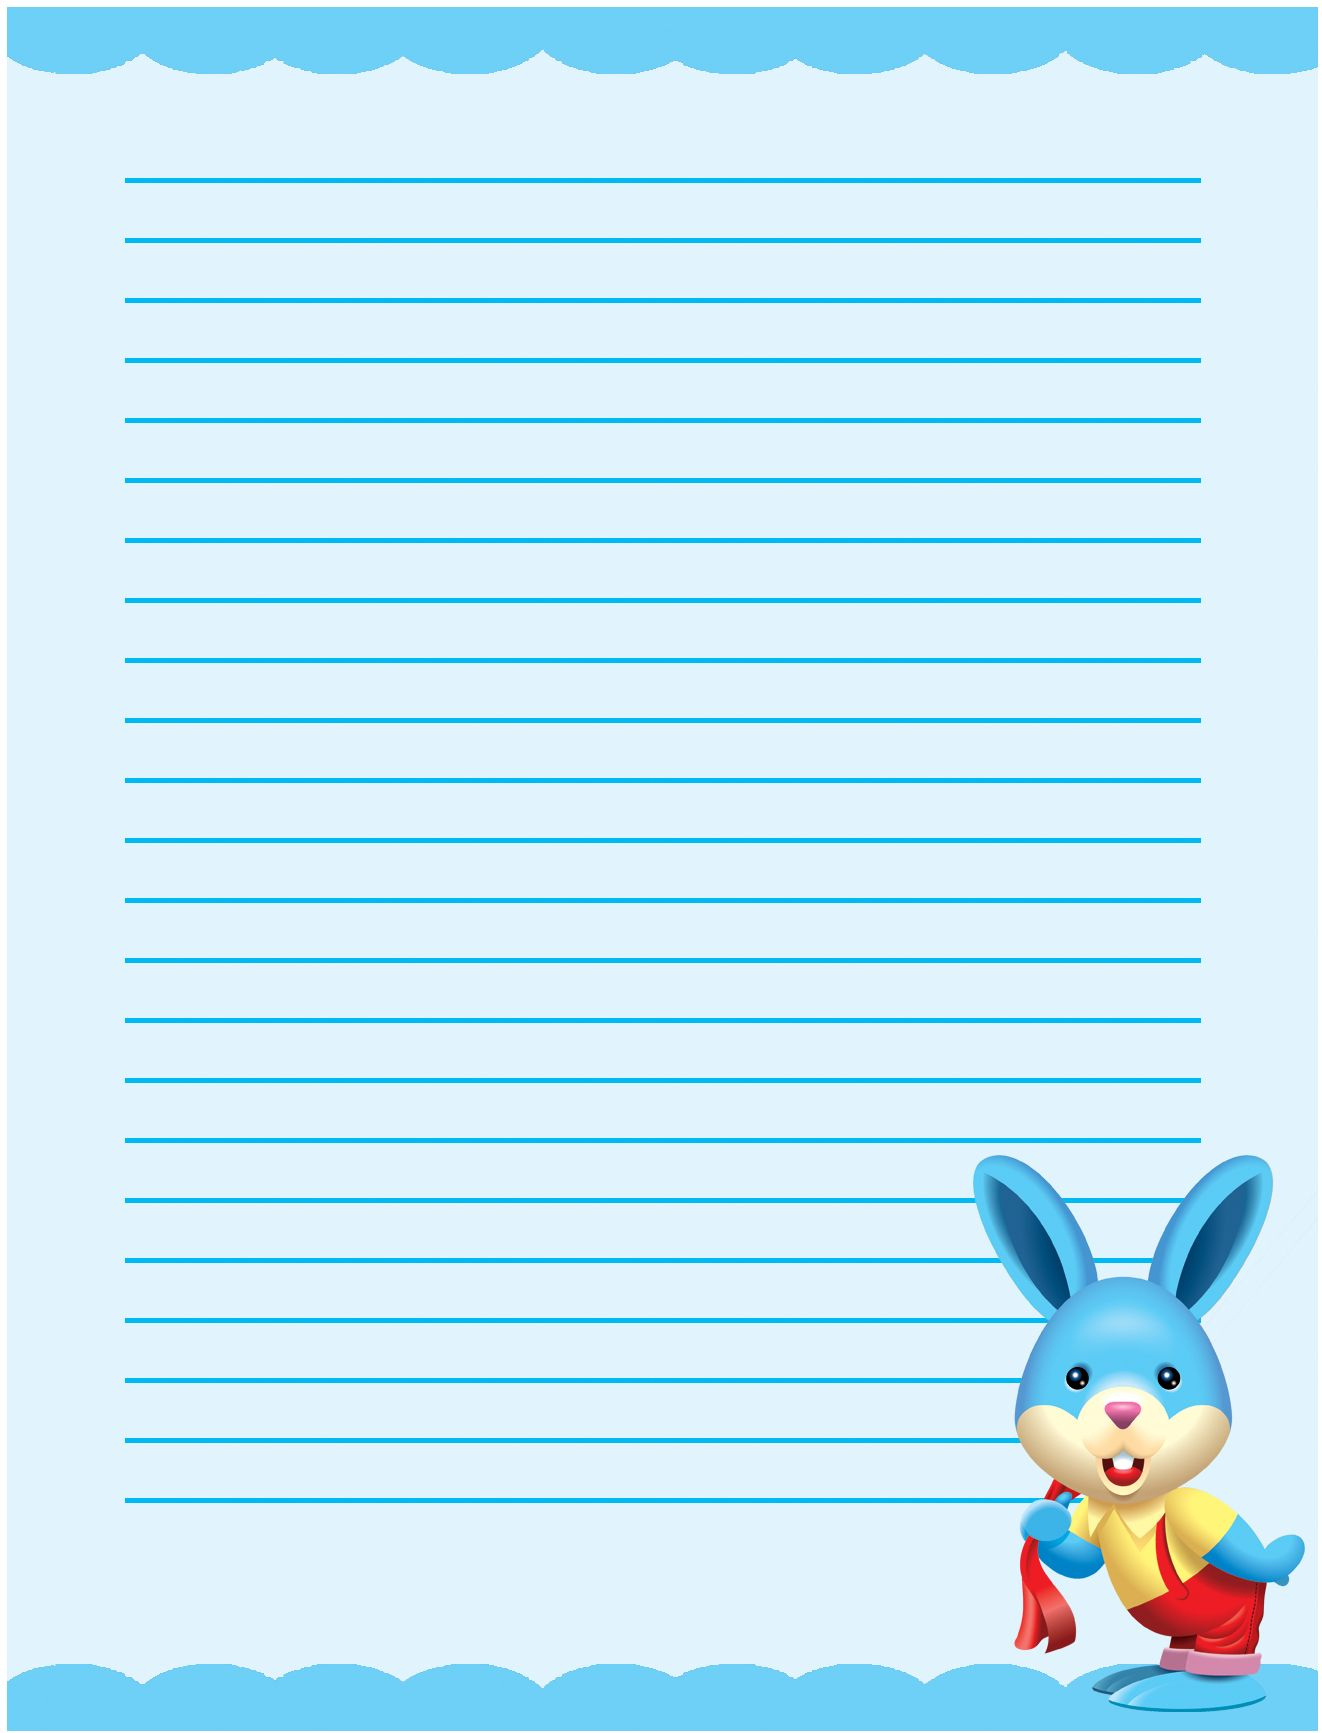 Cute Bunny Single Lined Writing Paper Template Free Printable 